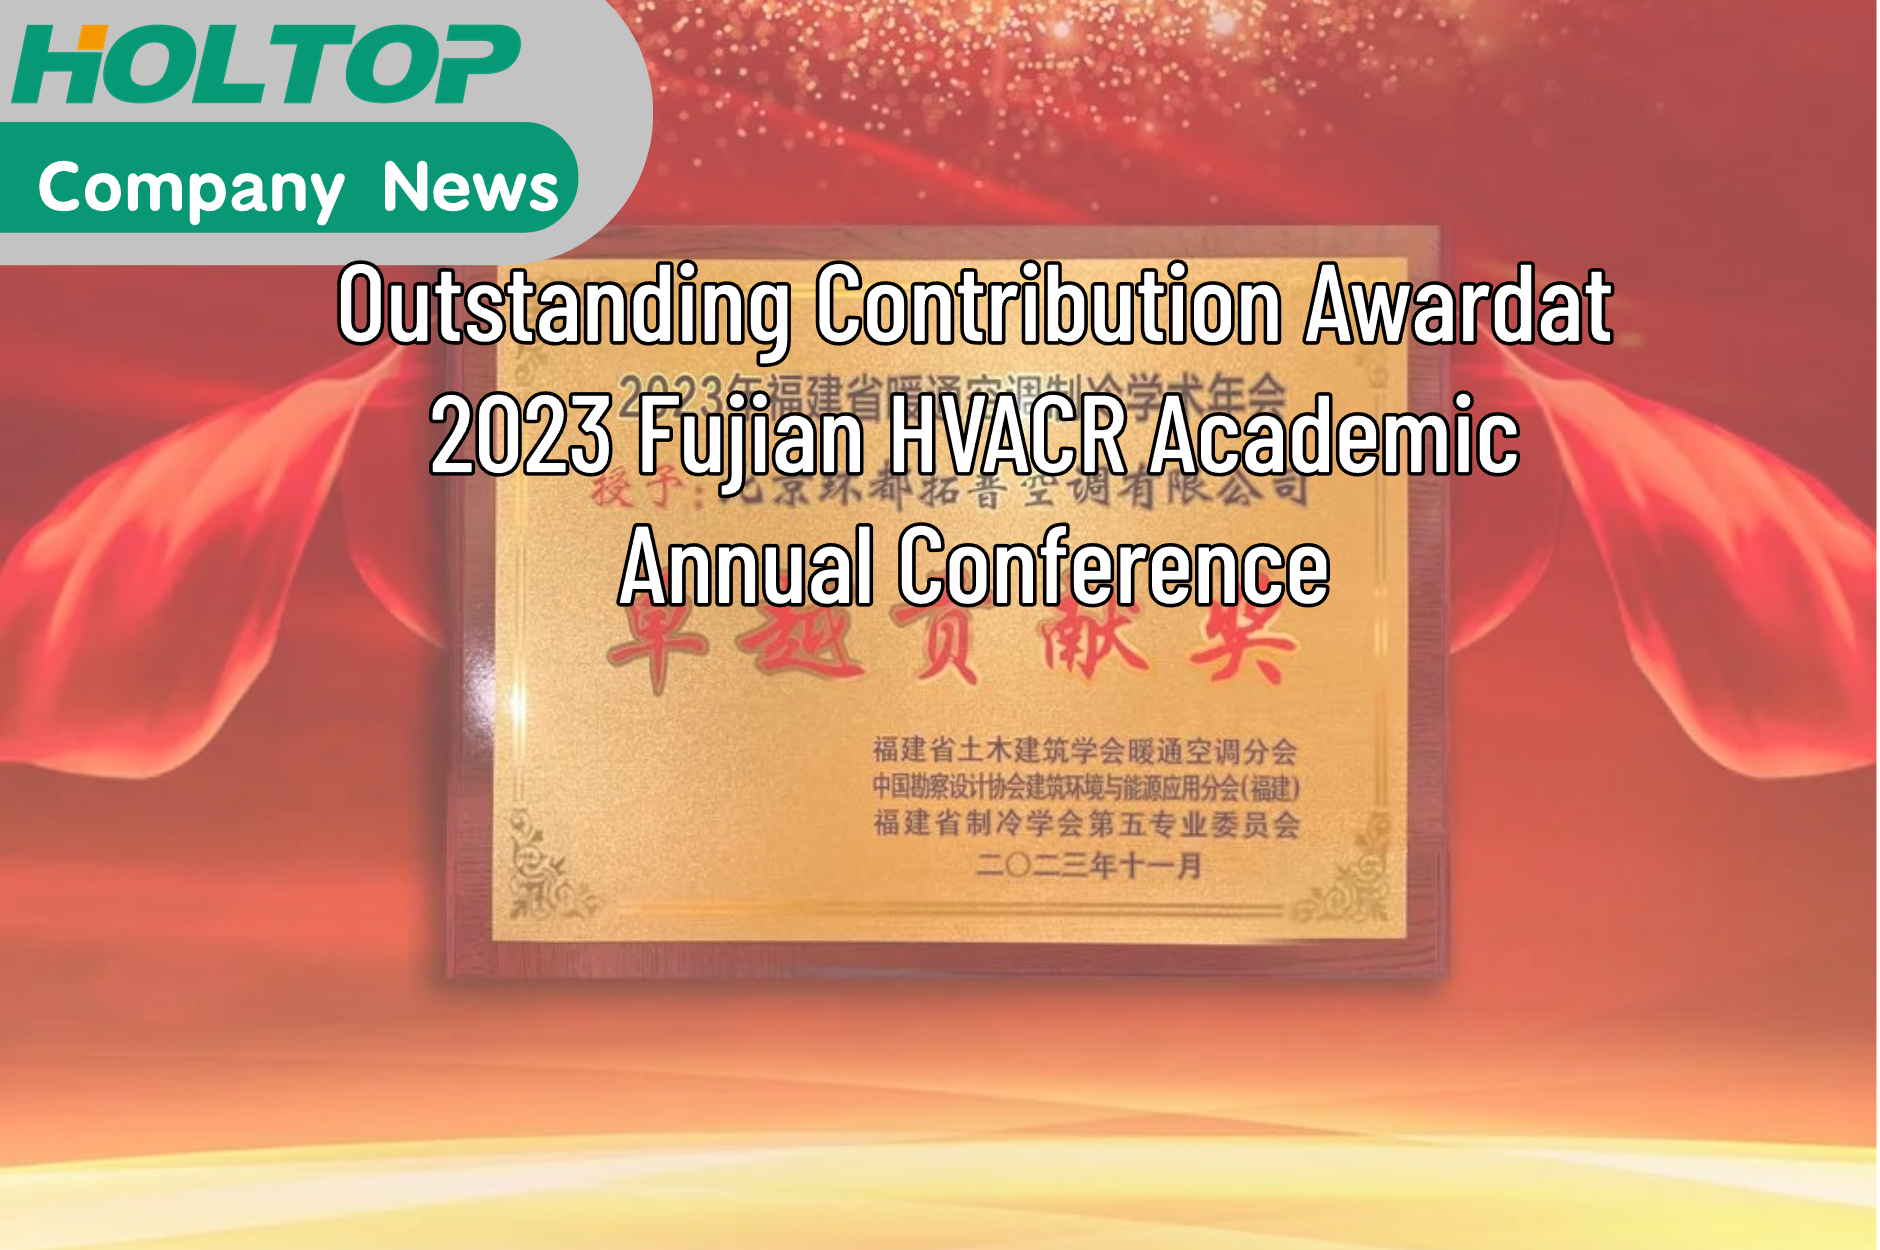 HOLTOP Receives Outstanding Contribution Award at 2023 Fujian HVACR Academic Annual Conference